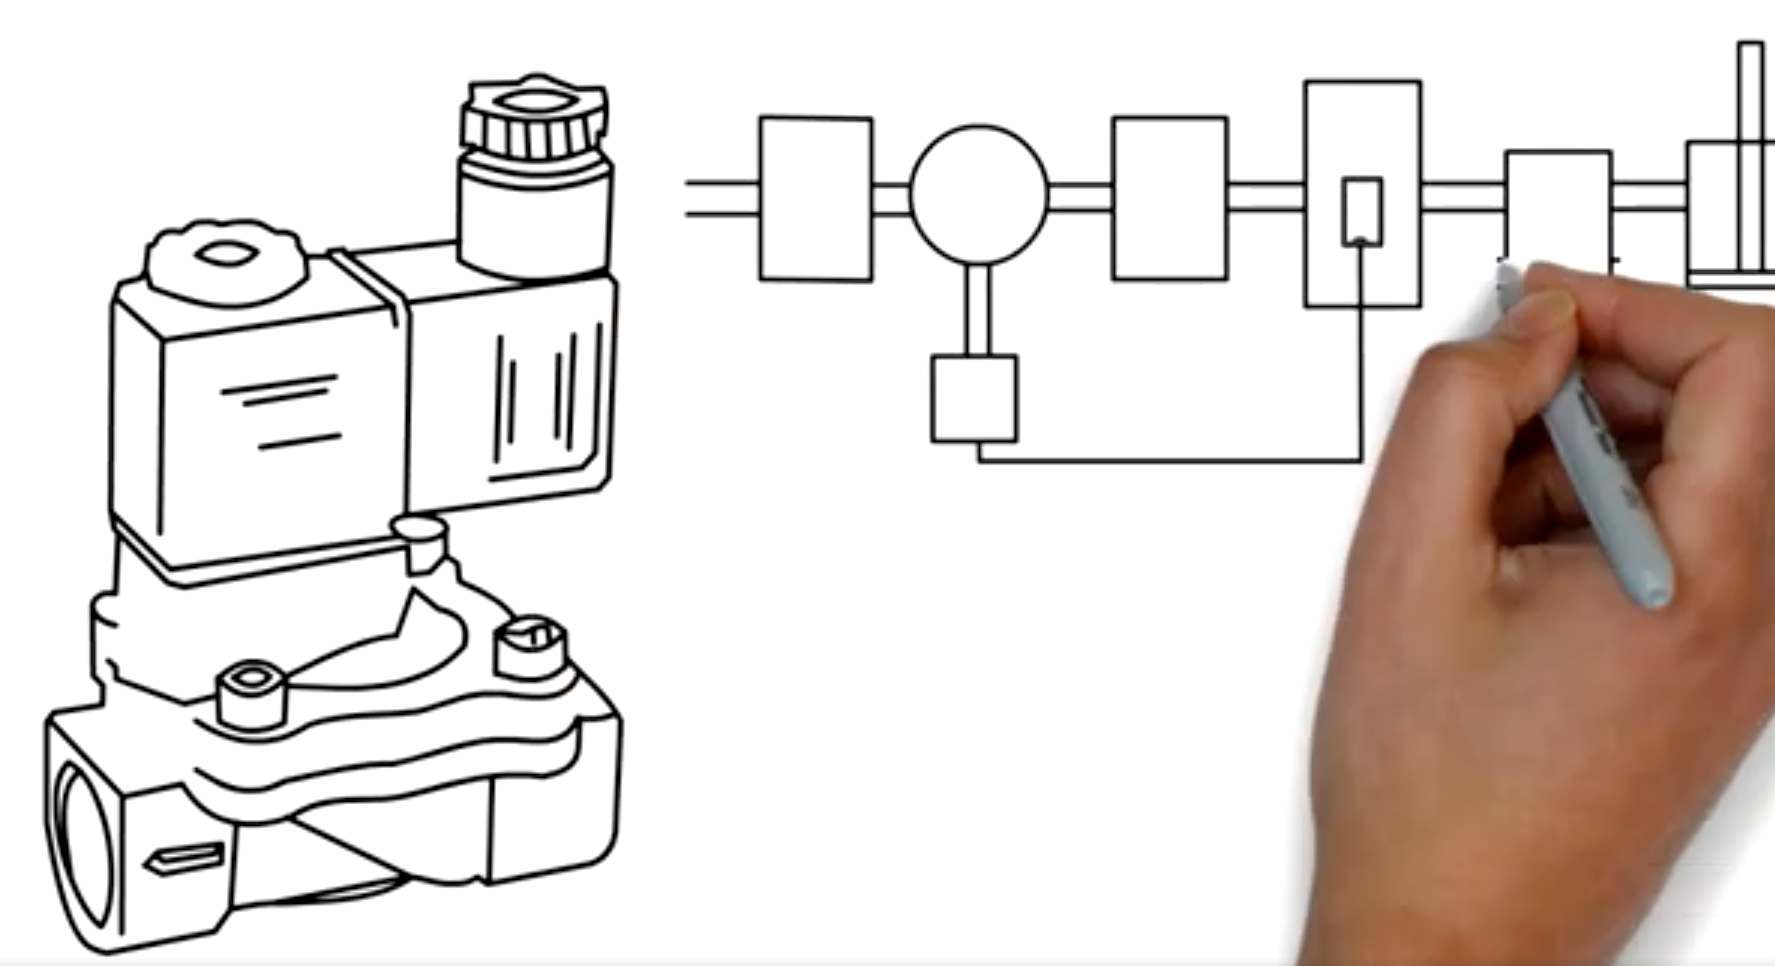 How a two-way valve works